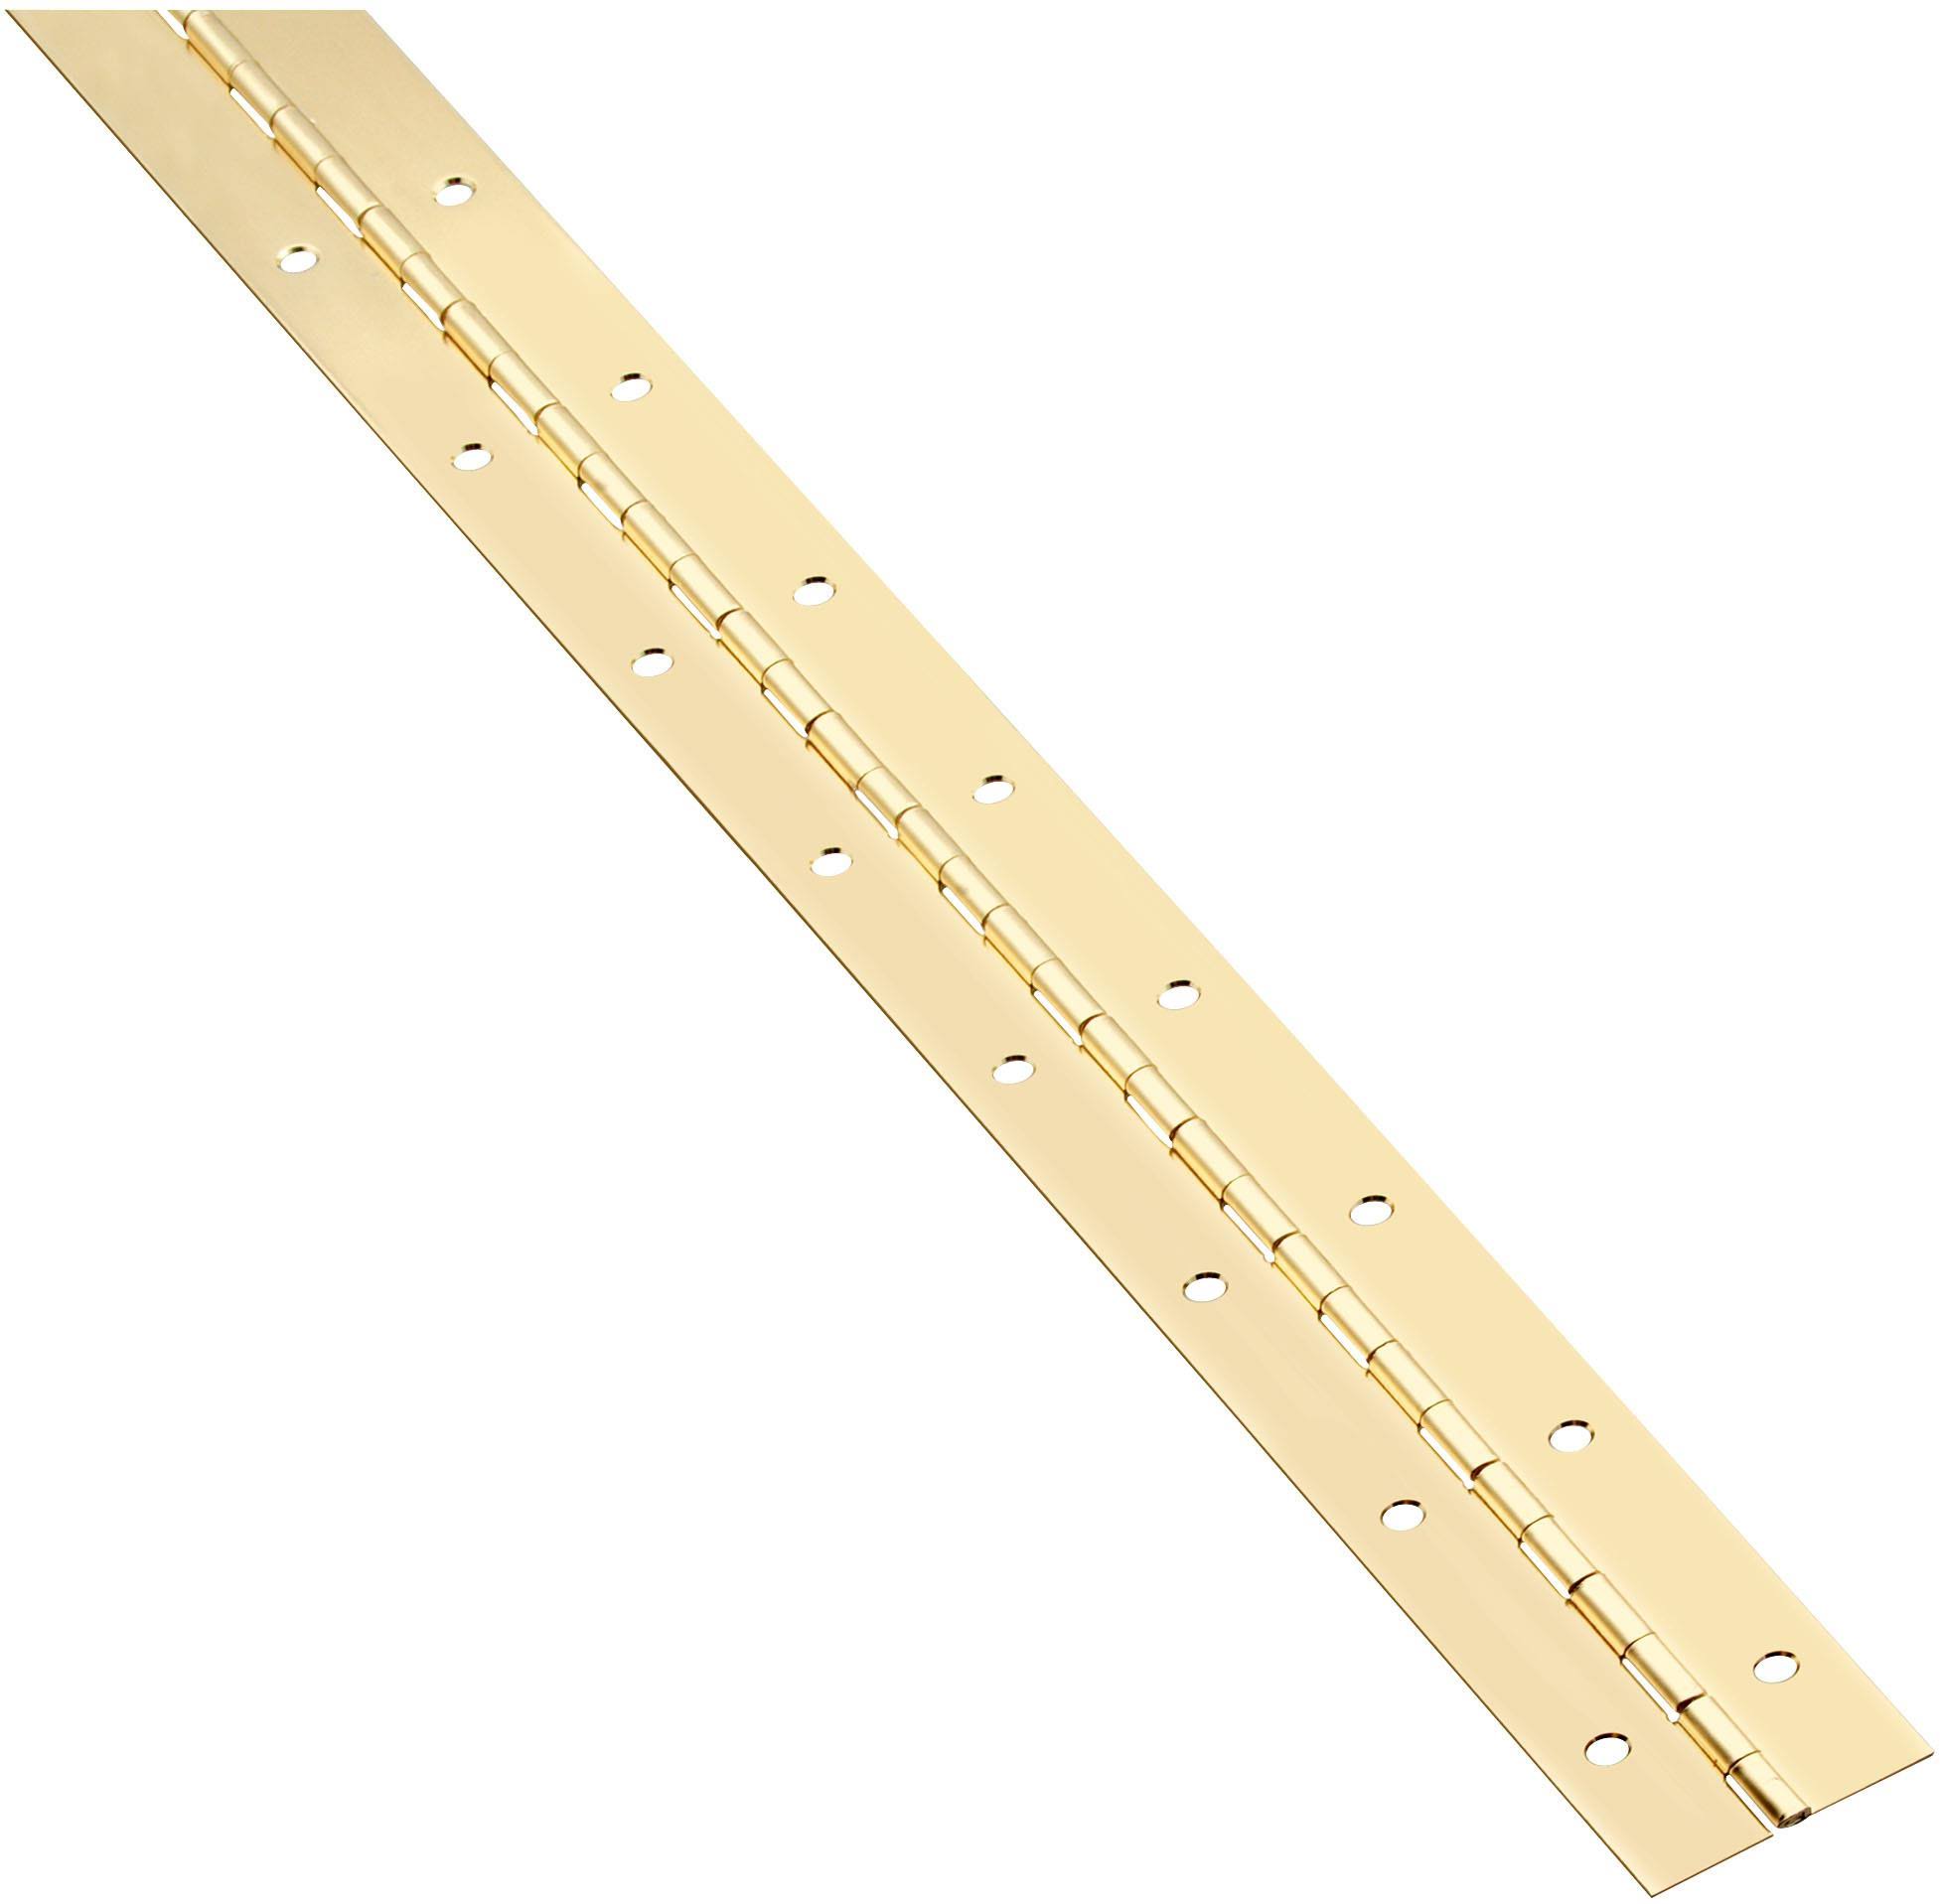 National Hardware Continuous Brass Hinge - 1 1/2" x 48"